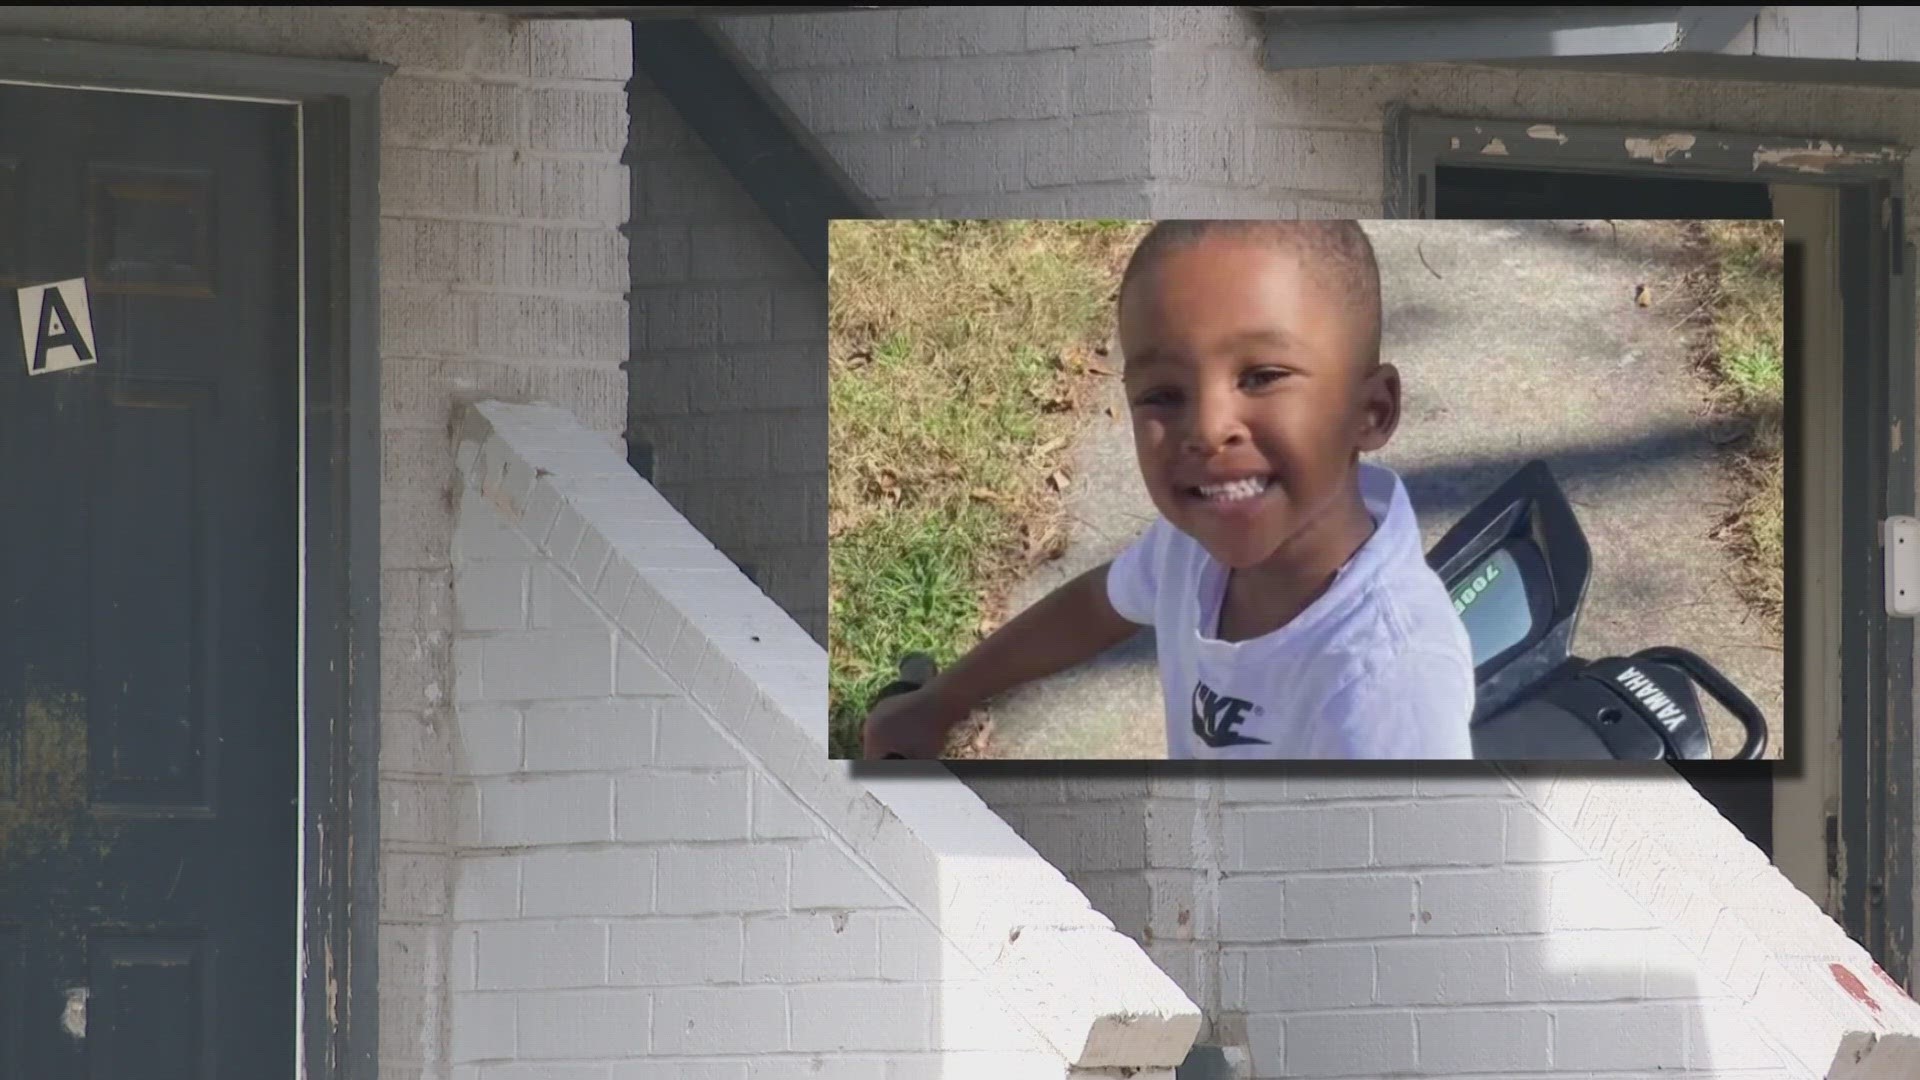 Newly released warrants have revealed new details into a 6-year-old boy's death after he was found unresponsive at an Atlanta fire station.